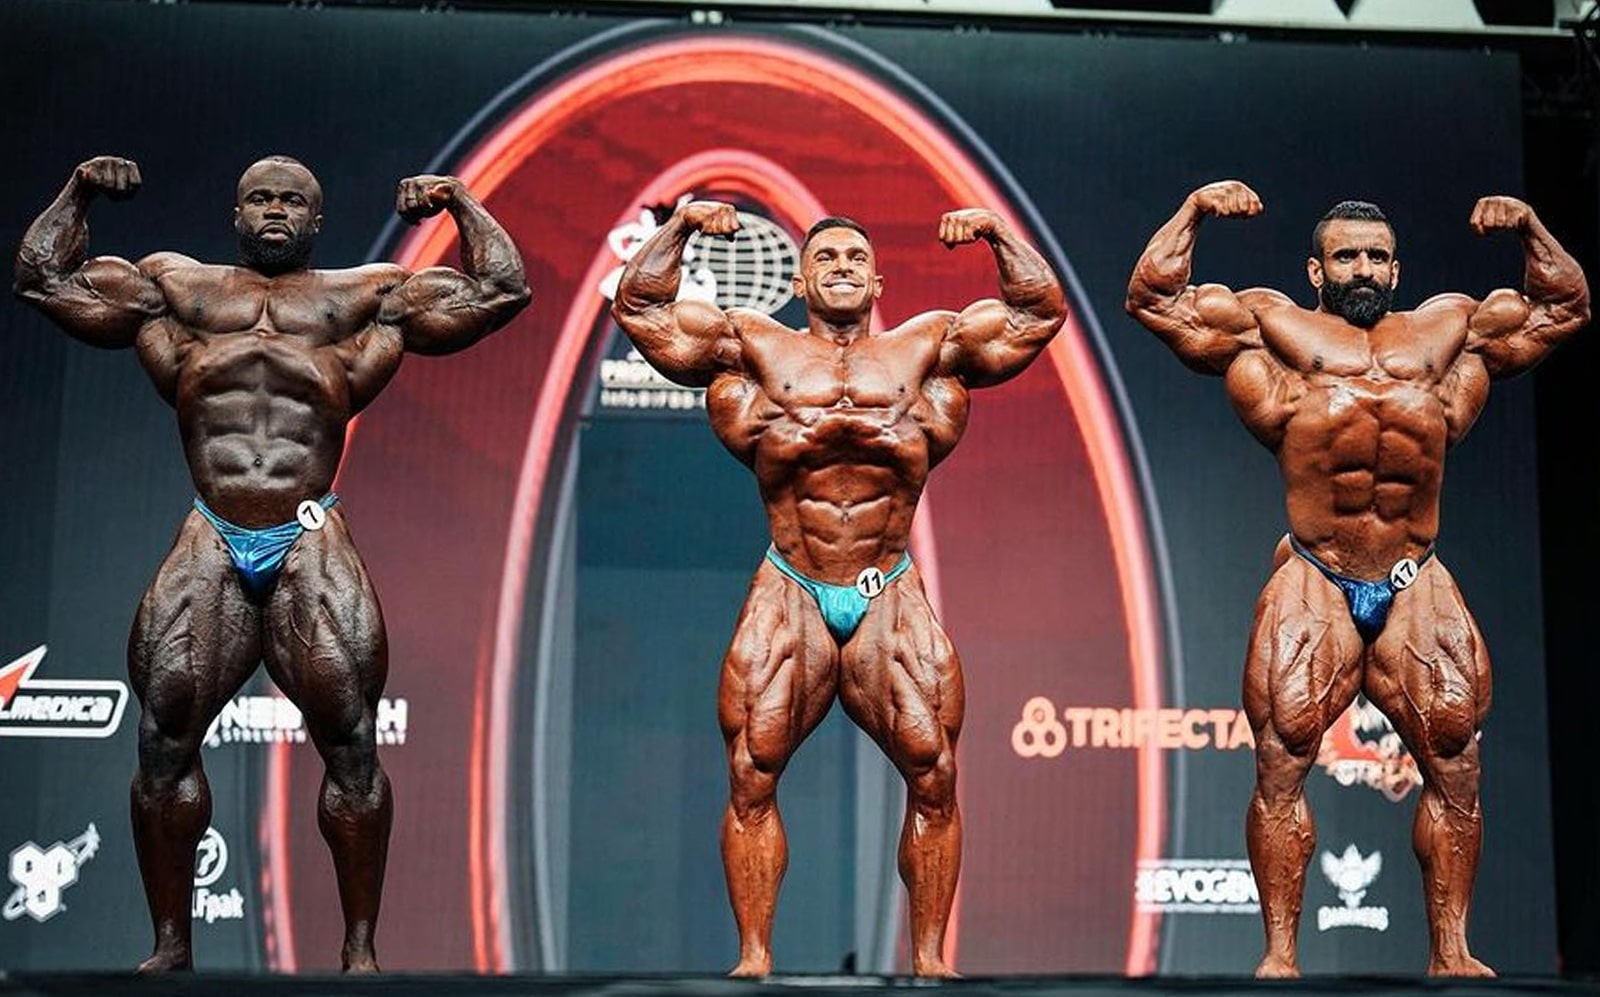 Mr. Olympia 2023: When is it, what time does it start, and where